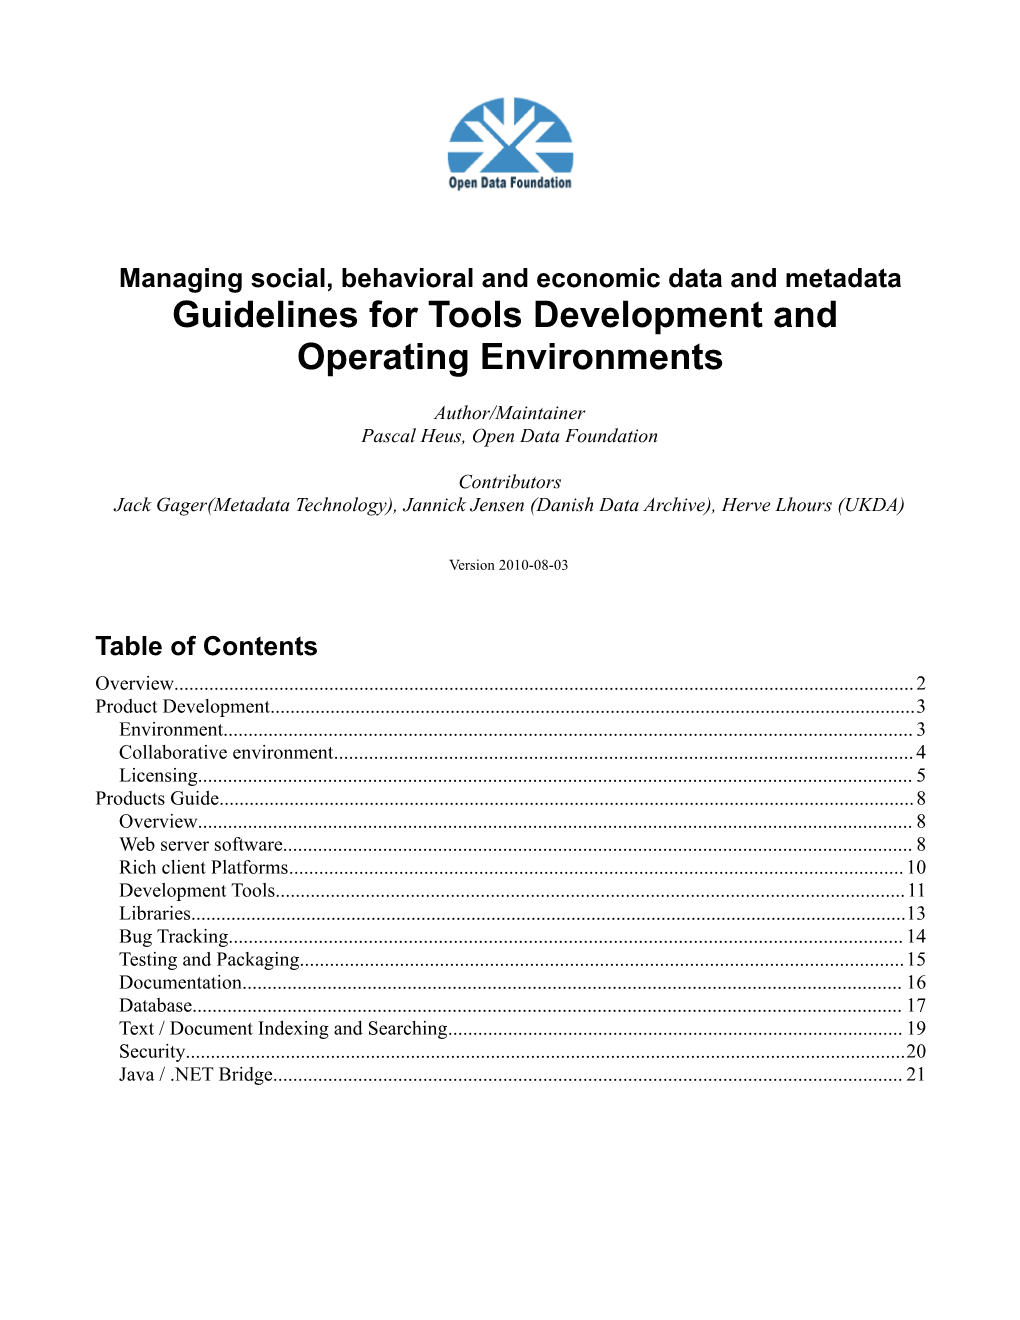 Guidelines for Tools Development and Operating Environments